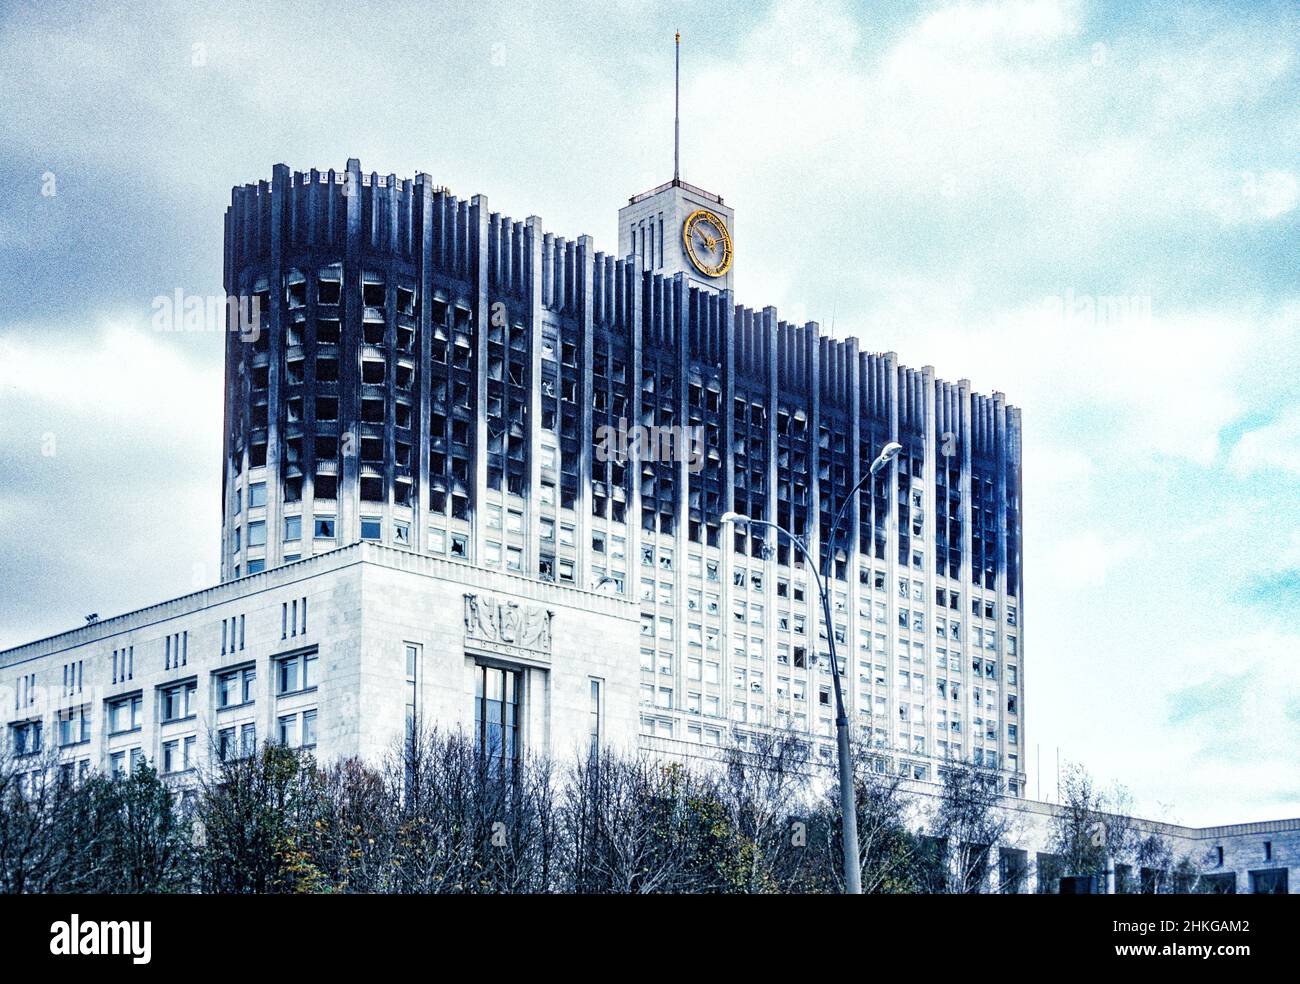 1993: The House of the Government of the Russian Federation, damaged after shelling during the 1993 Russian constitutional crisis. Stock Photo